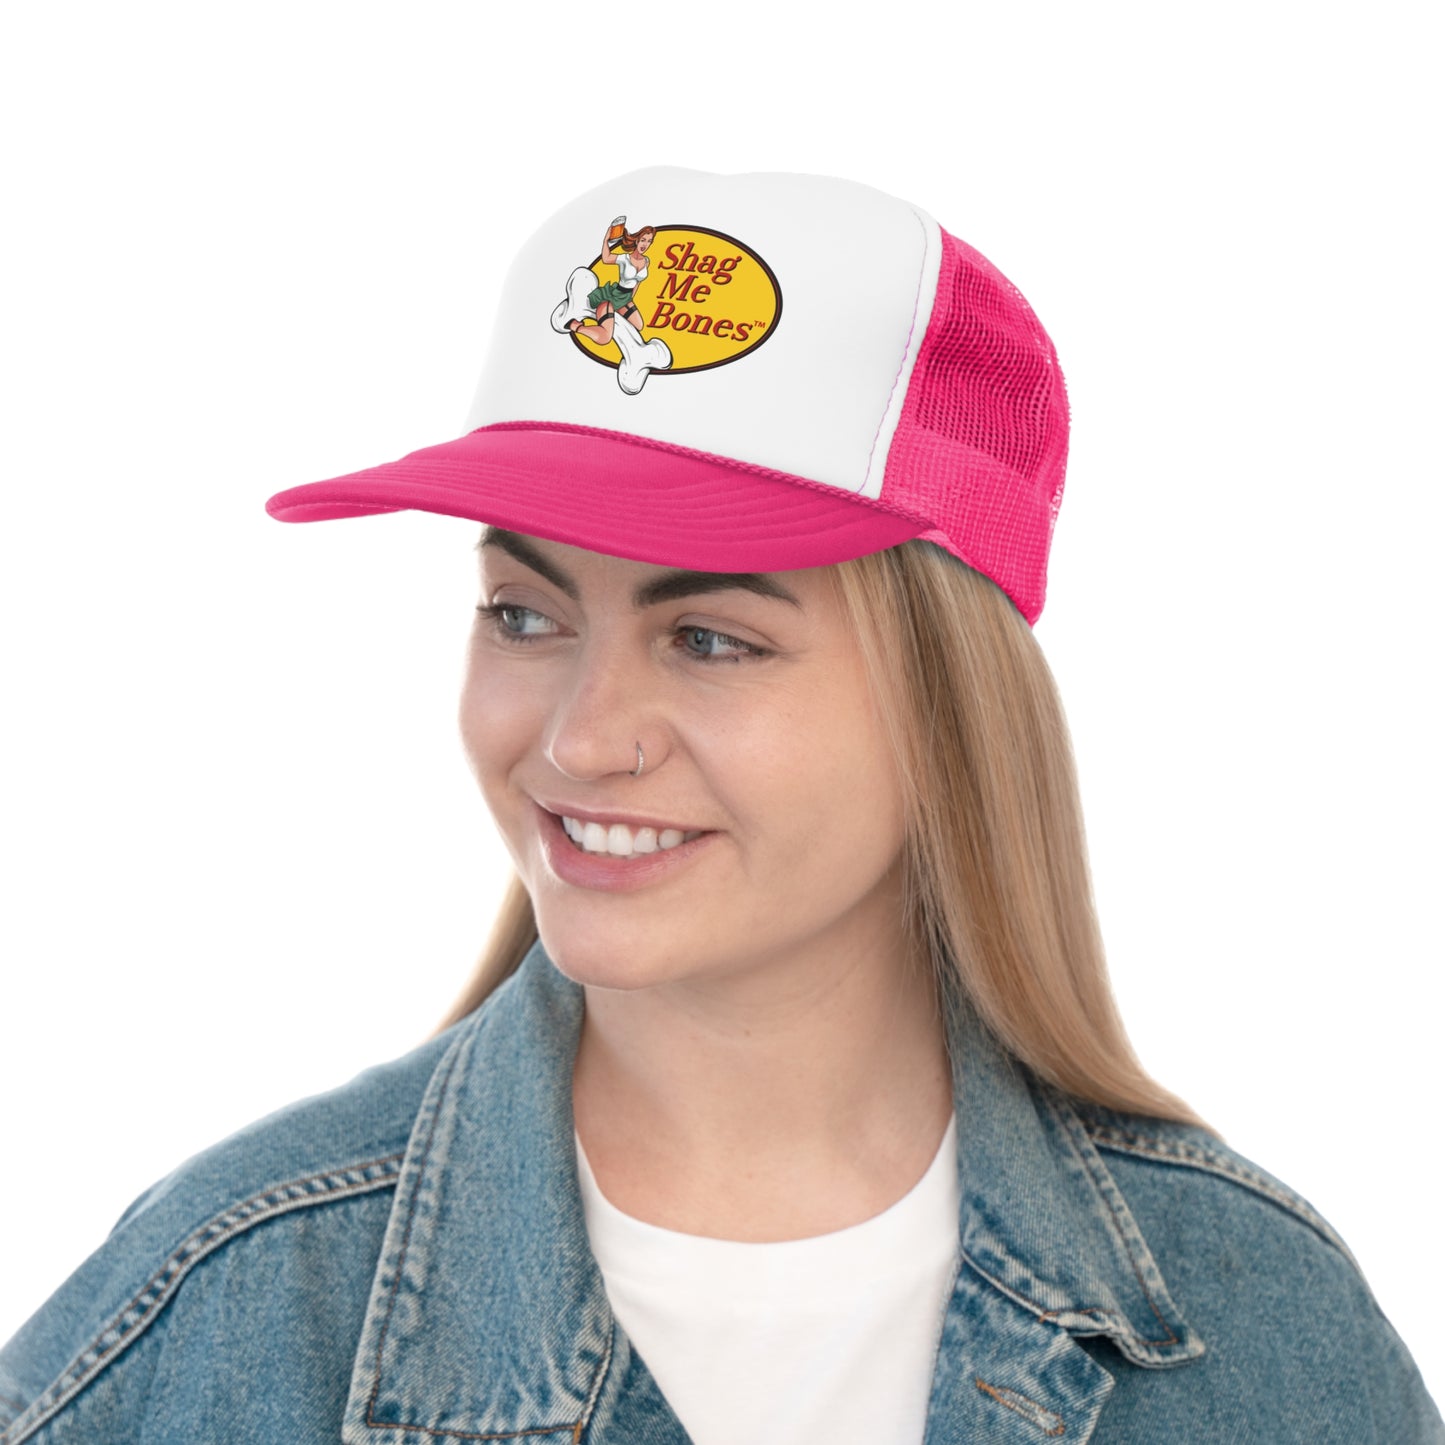 Pin-Up Trucker Style Hat